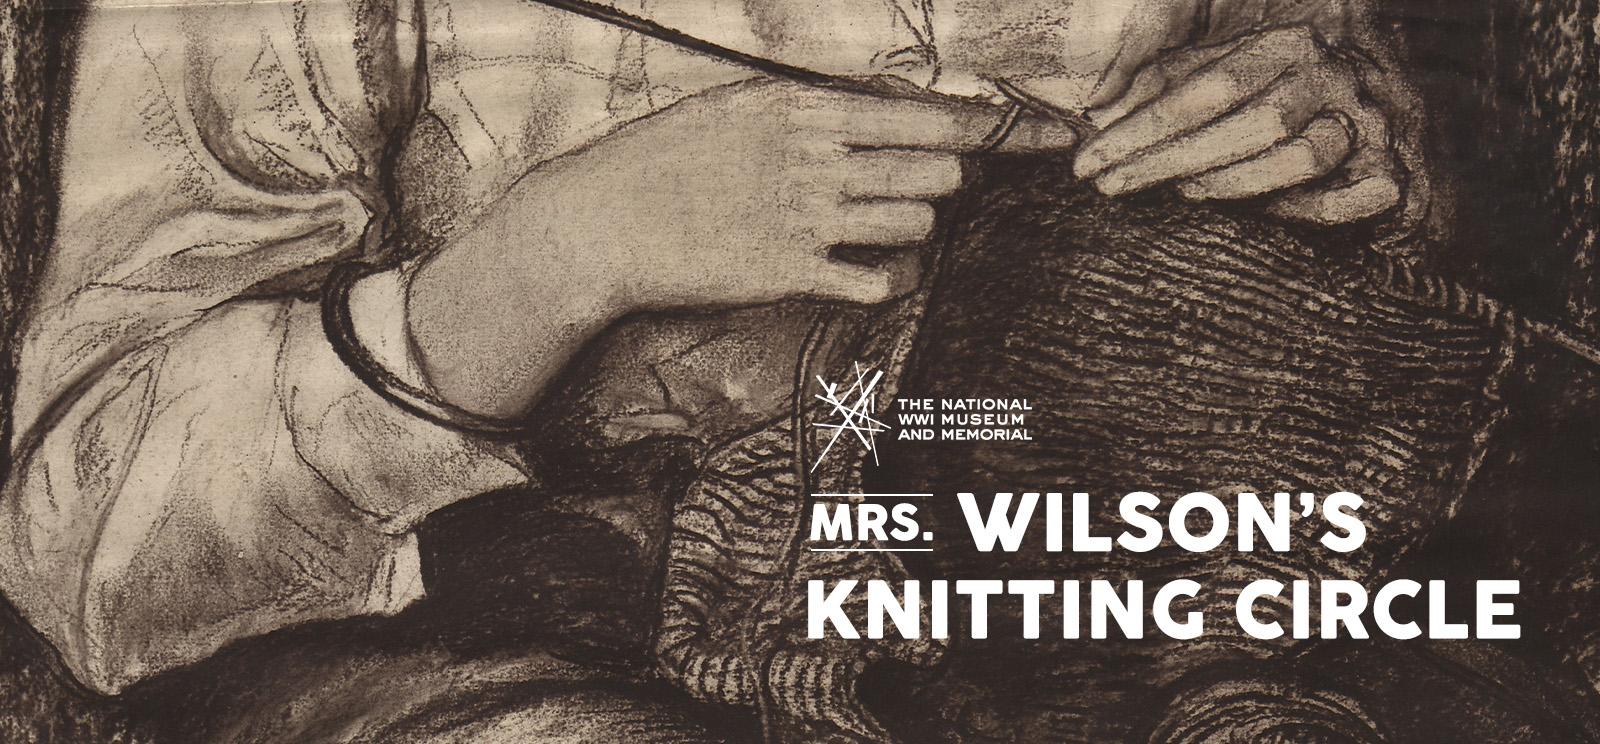 Painting of a woman's hands knitting something. Text: Mrs. Wilson's Knitting Circle